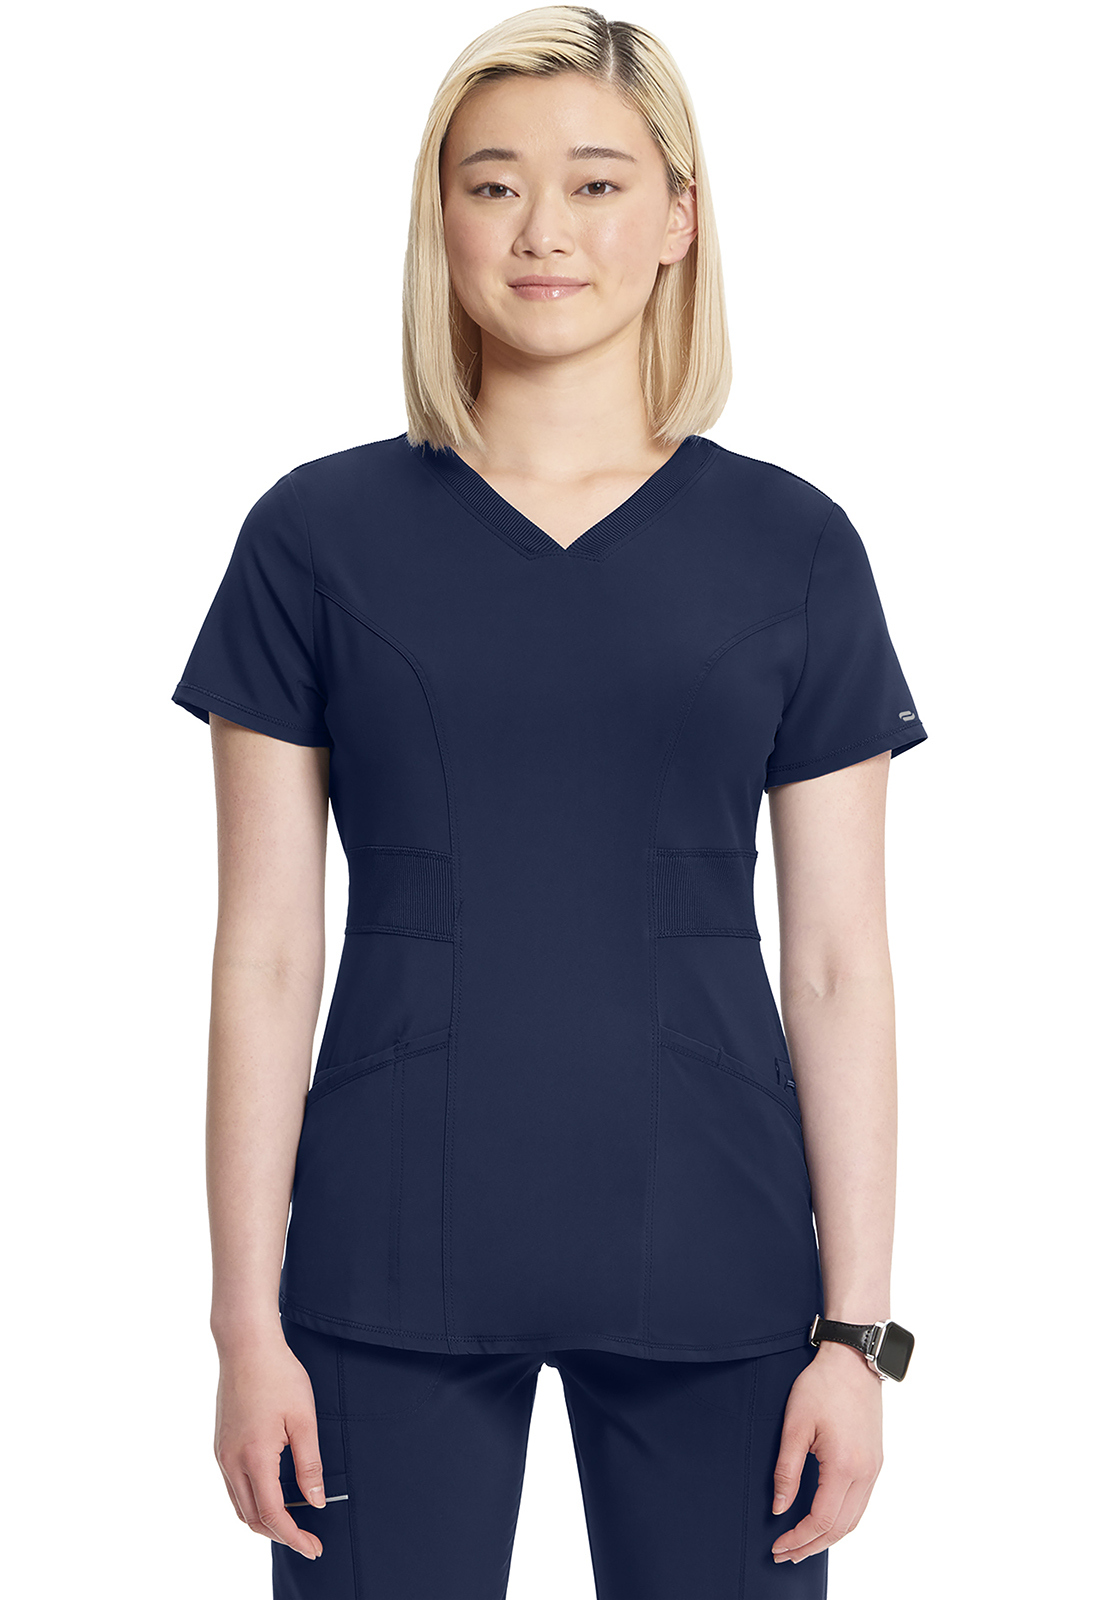 Infinity Scrubs - Your favorite Infinity styles just got a